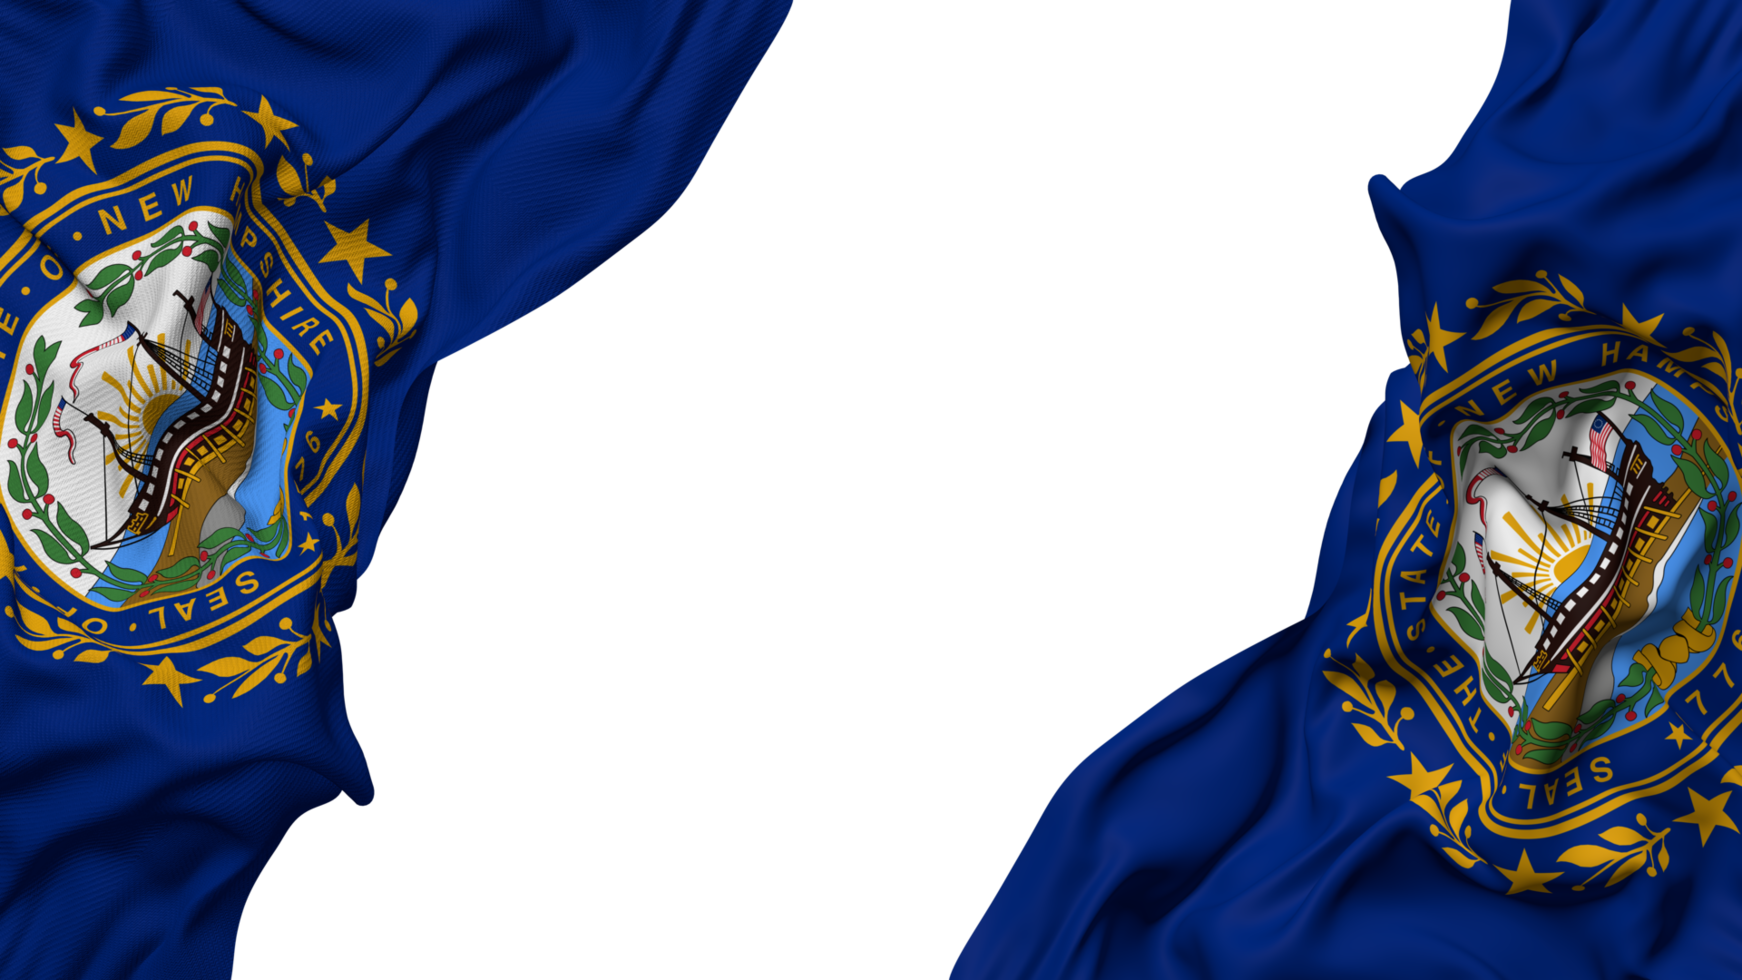 State of New Hampshire Flag Cloth Wave Banner in the Corner with Bump and Plain Texture, Isolated, 3D Rendering png